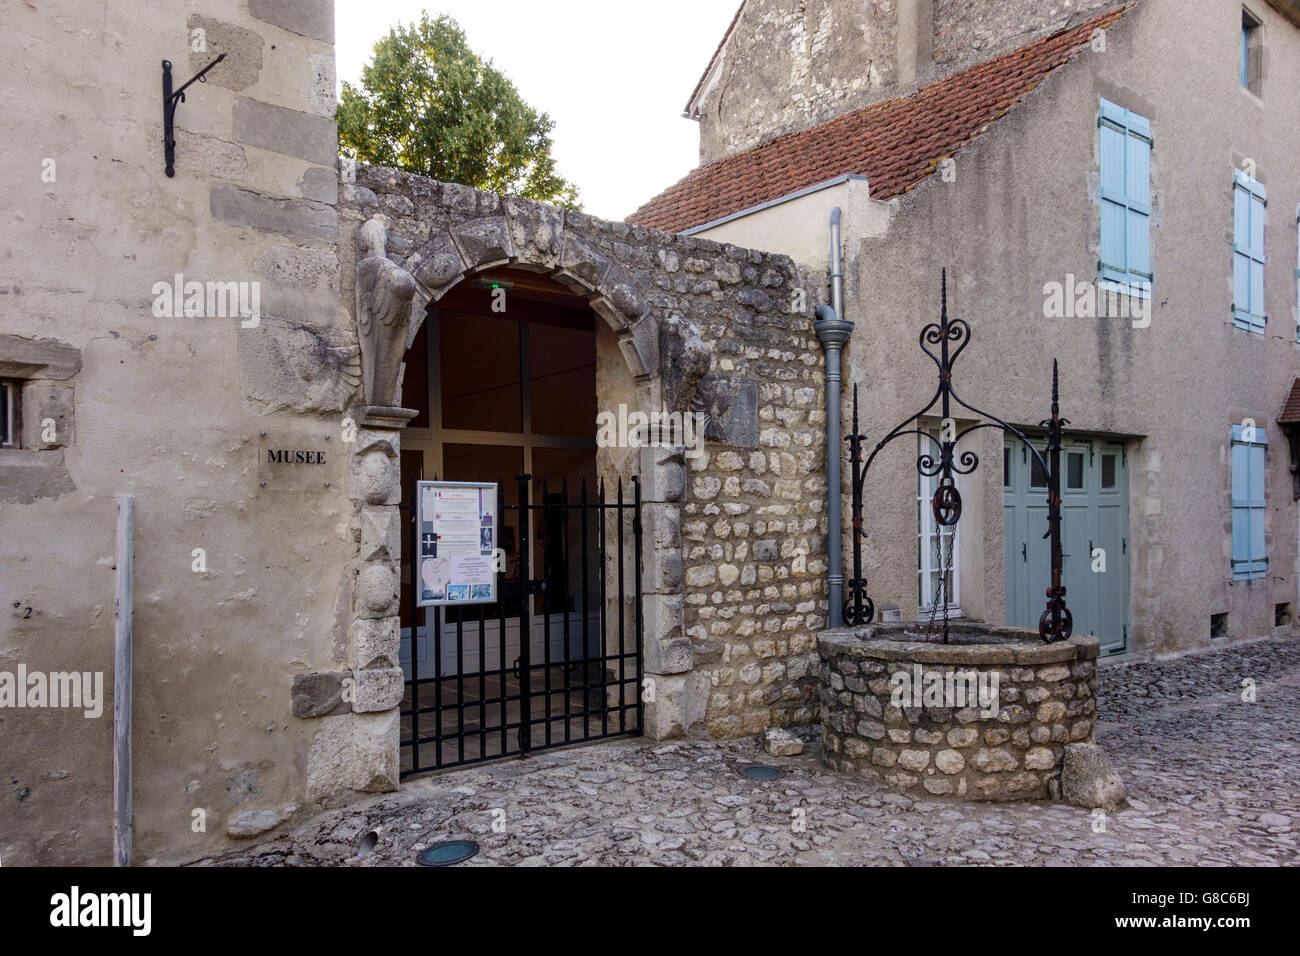 Museum in the village of Charroux, Allier, Auvergne (Charroux is classed as one of the most beautiful villages in France) Stock Photo